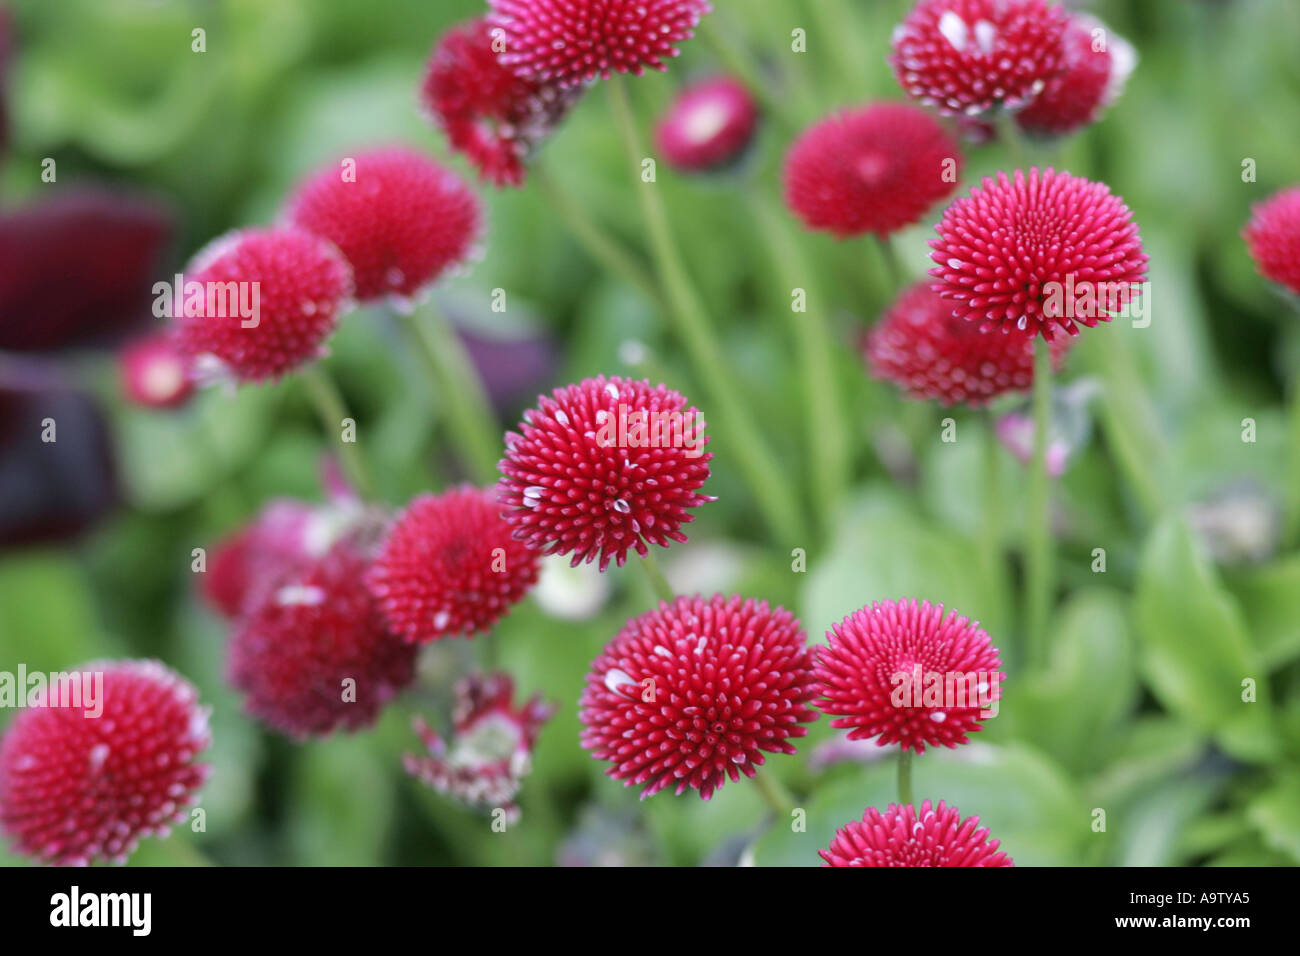 Red Bellis Perennis AGM pomponette double daisy county antrim northern ireland Stock Photo